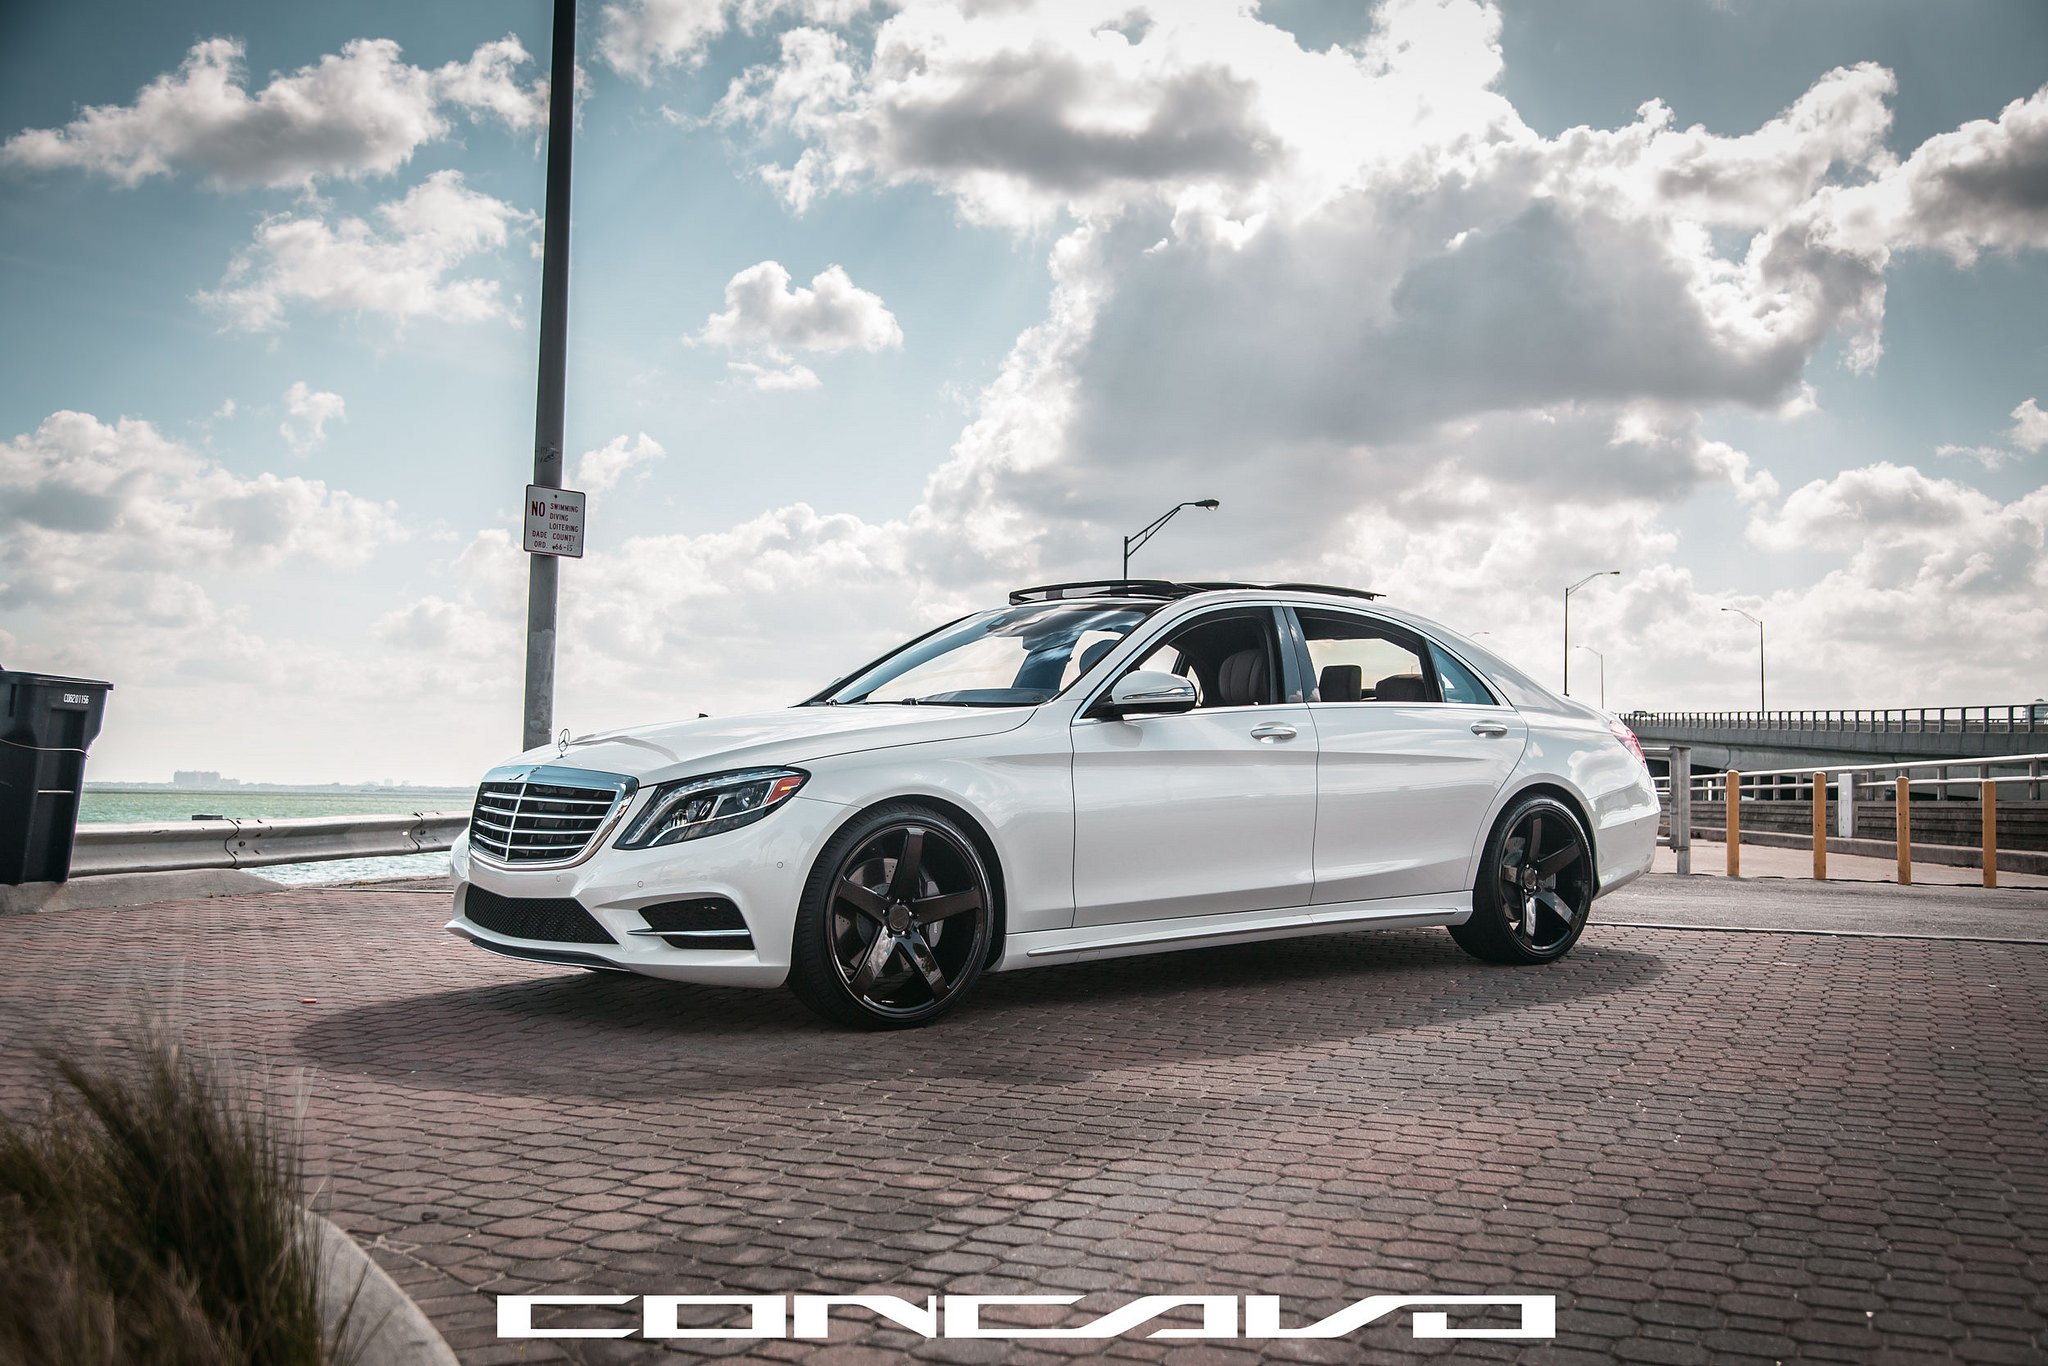 mercedes, Benz, S550, Tuning, Concavo, Wheels, Cars Wallpaper